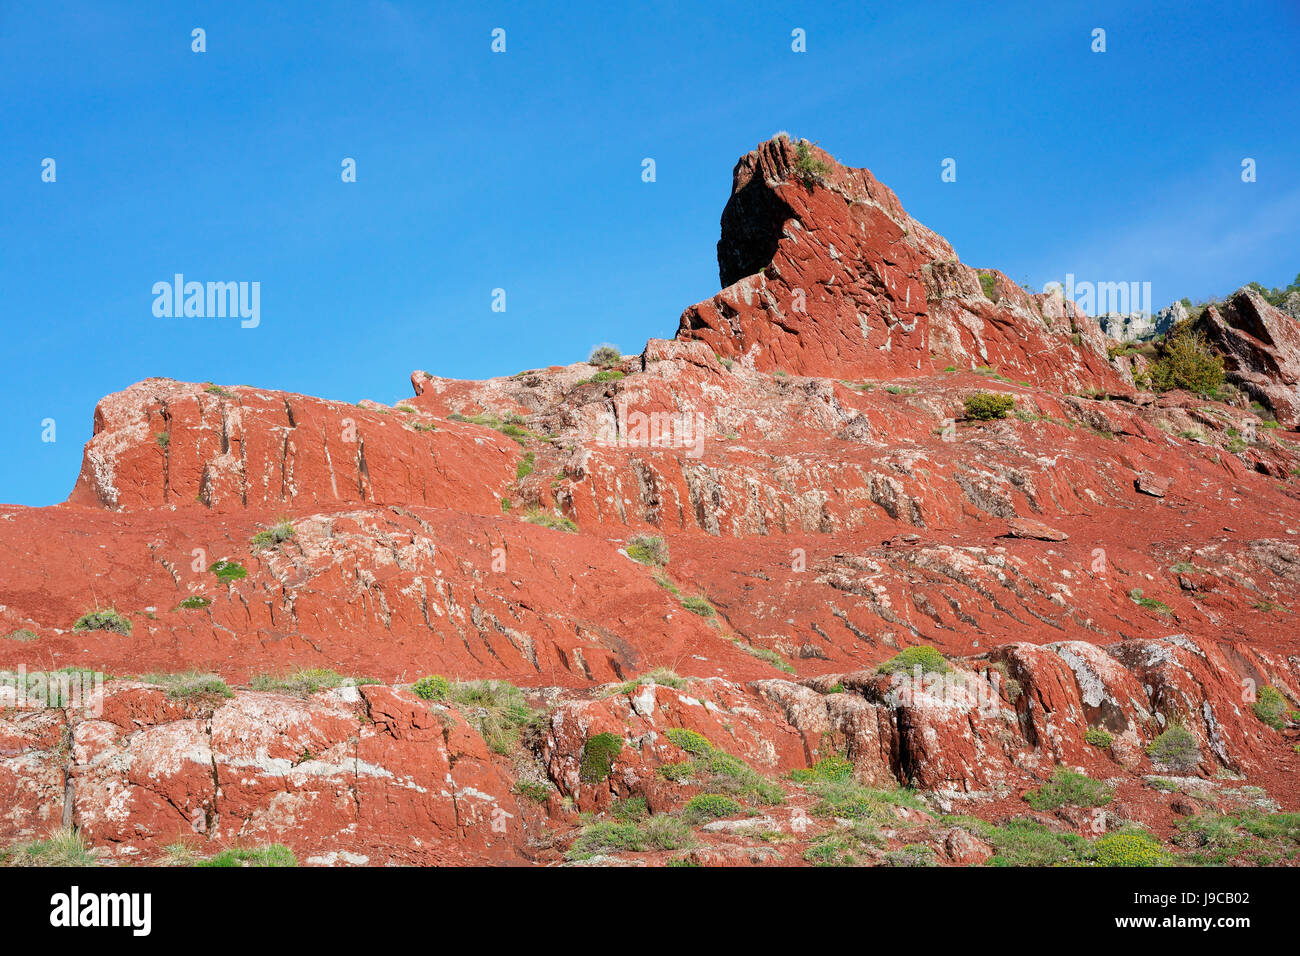 Red rocky outcrop on the upper elevation of the Cians Gorge. L'Illion, Beuil, Alpes-Maritimes, Provence-Alpes-Côte d'Azur, France. Stock Photo